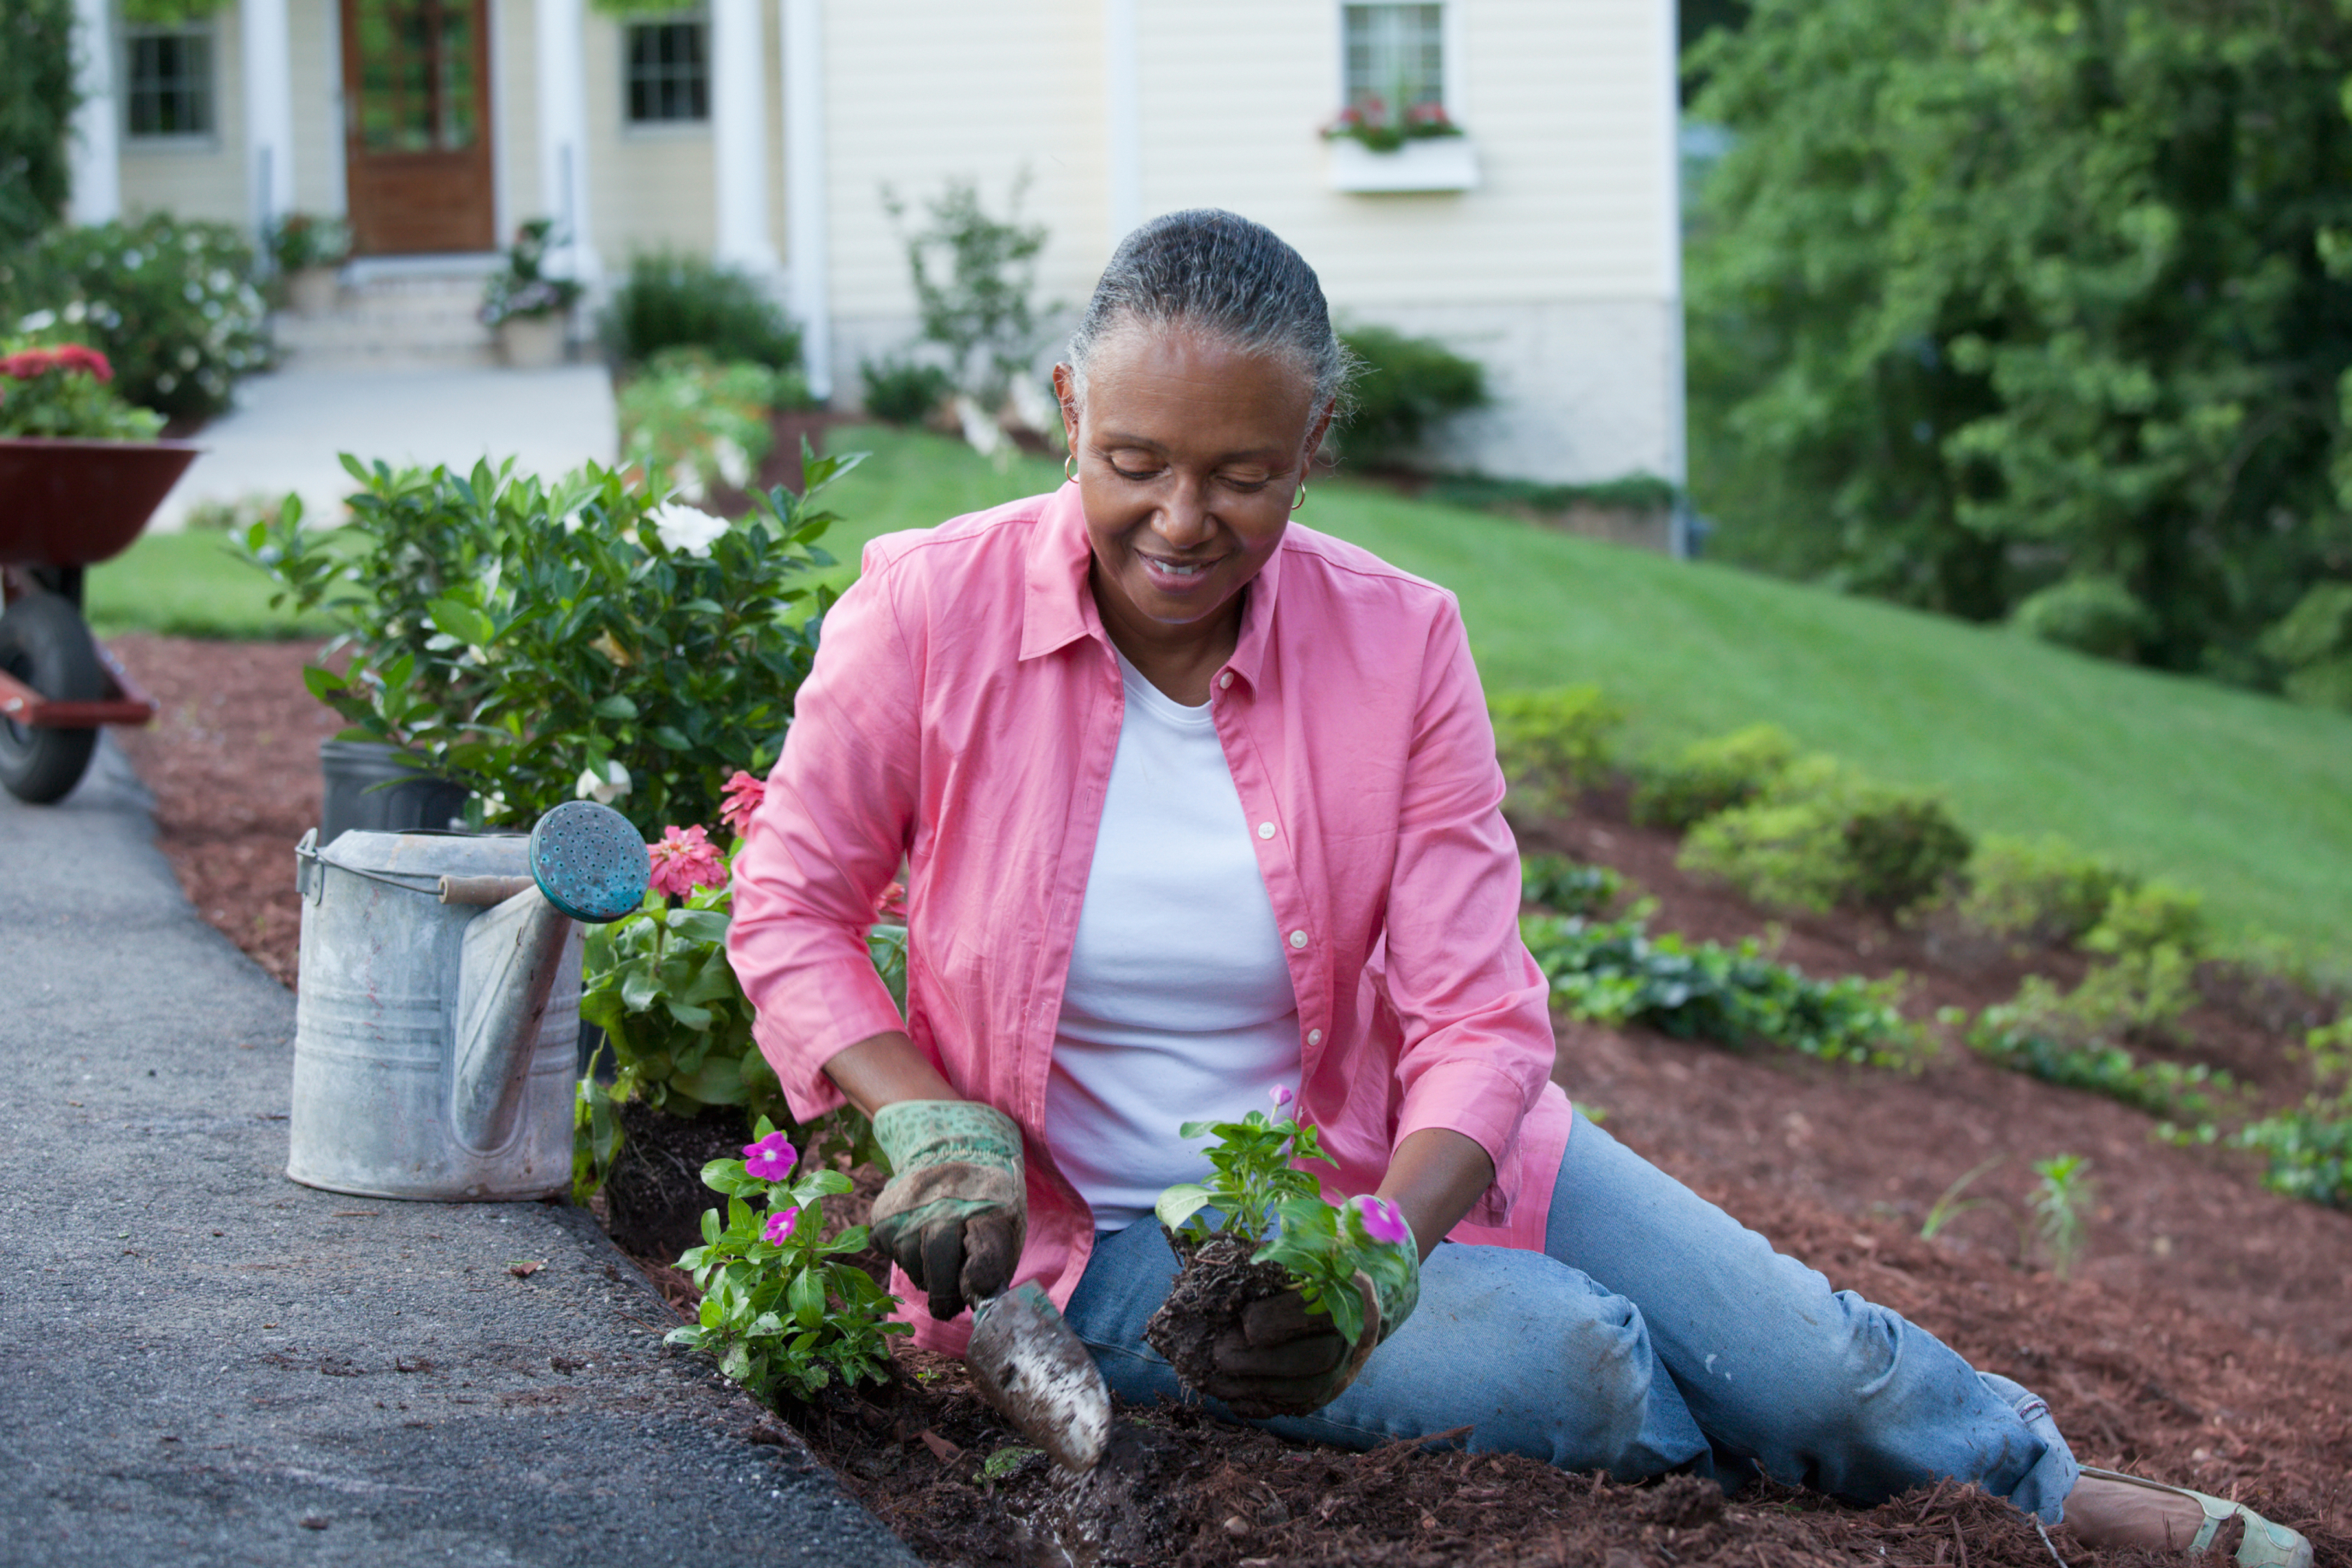 Woman seated in her front yard smiling as she plants annual flowers